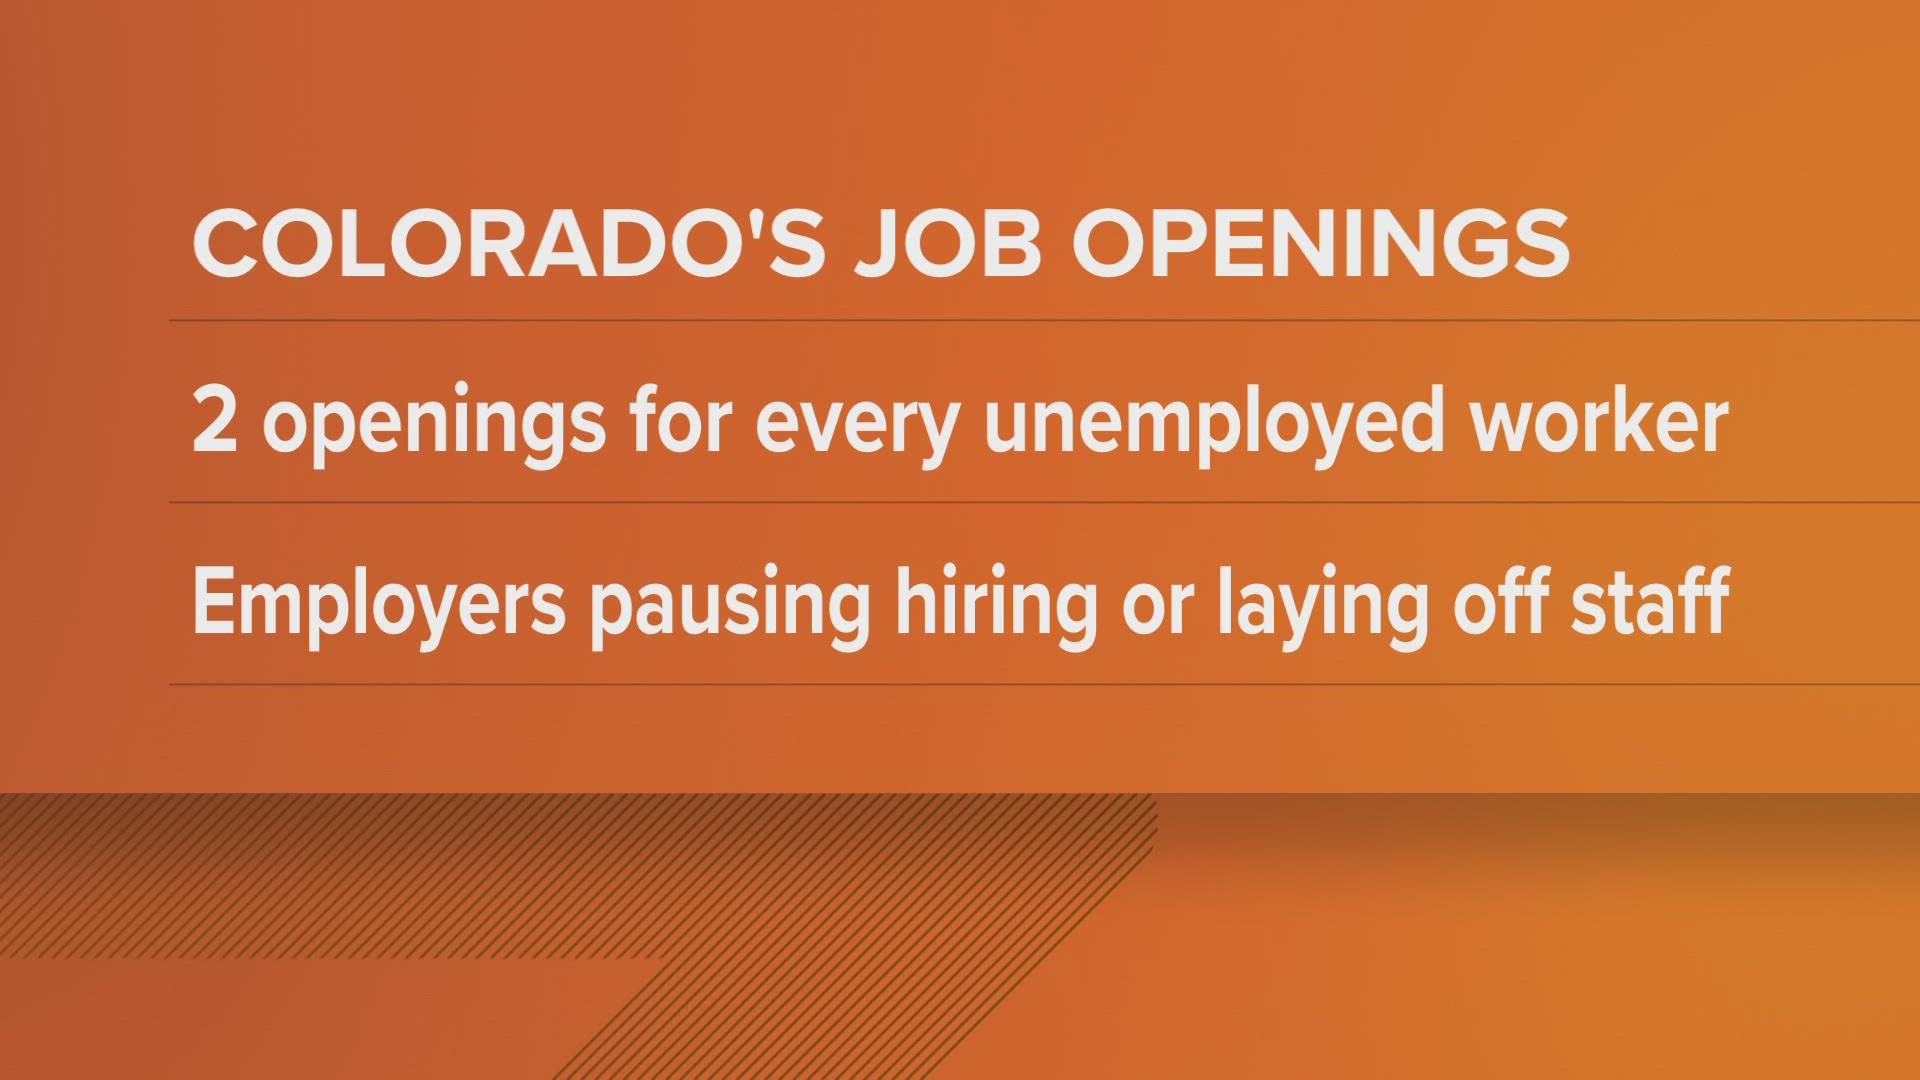 The latest workforce numbers for Colorado show a new trend when it comes to job openings and unemployed workers. Employment expert Whitney Traylor weighs in.